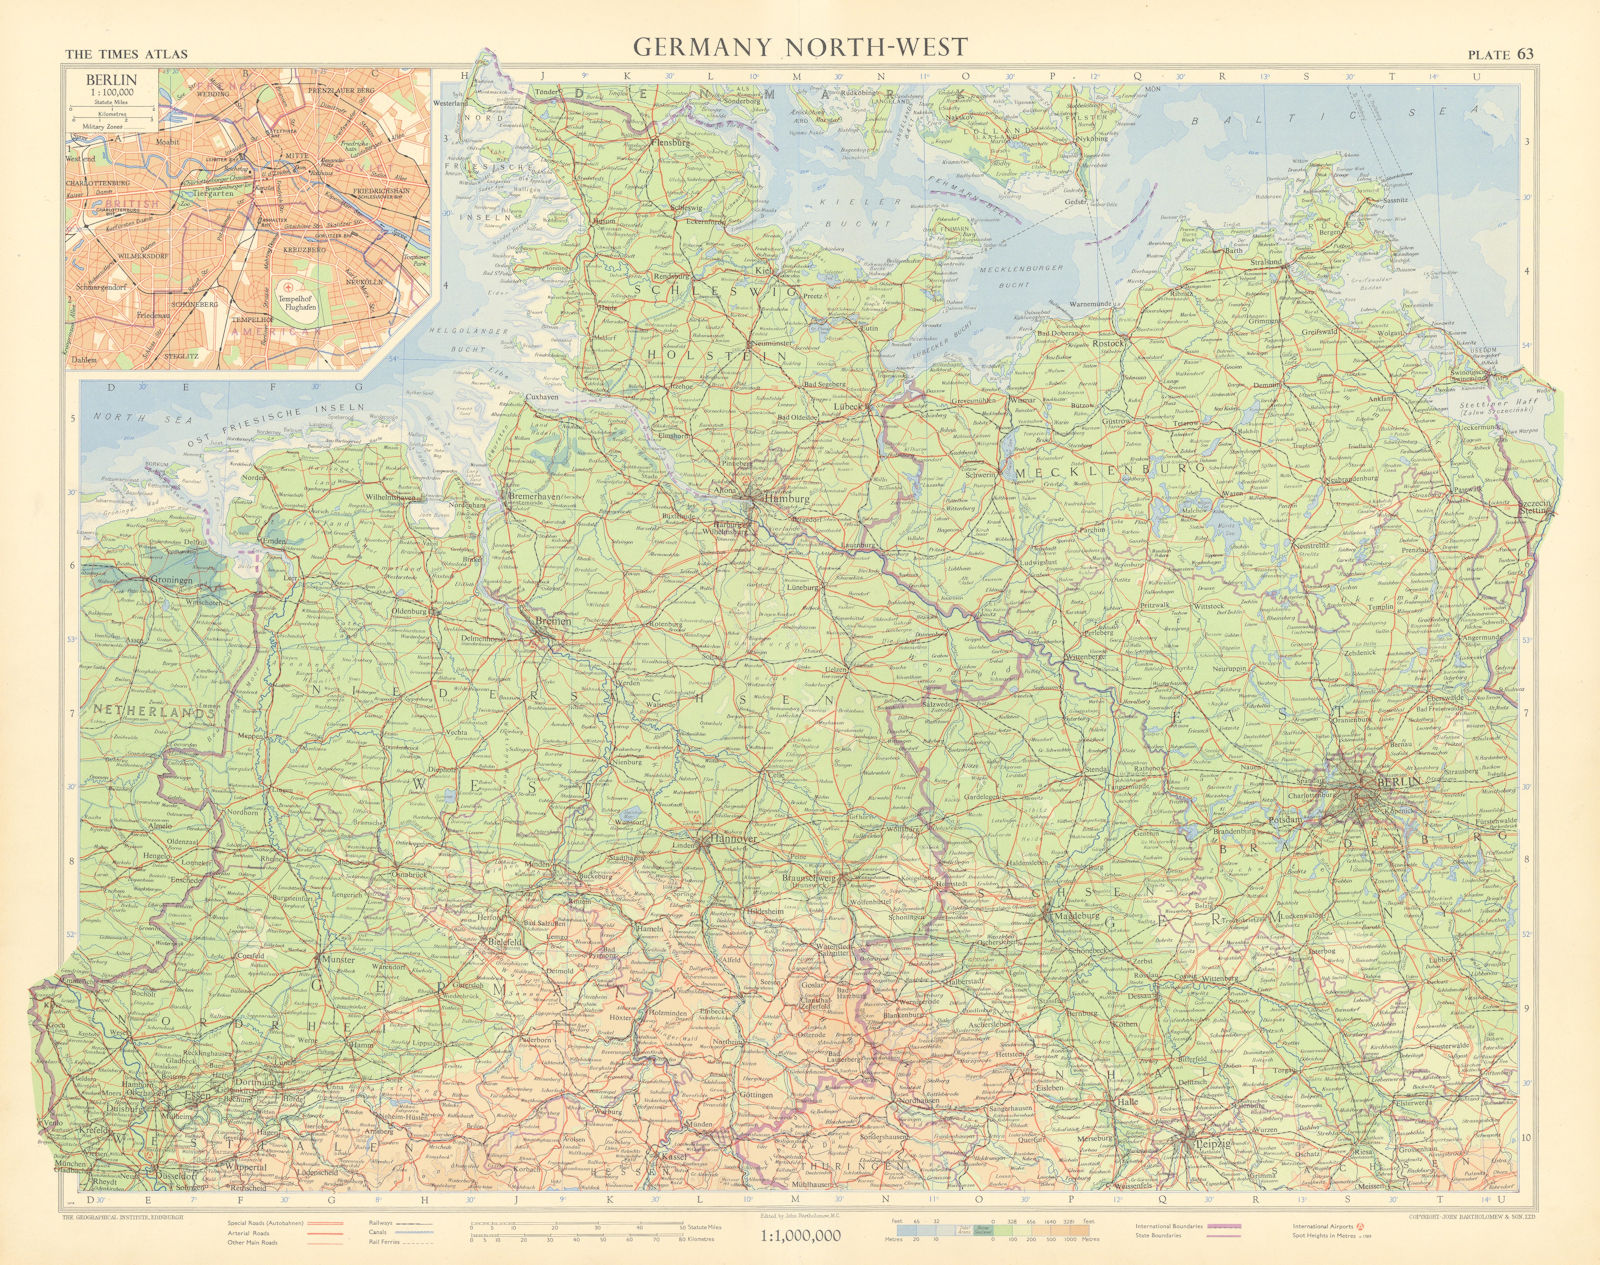 Associate Product Northern Germany. Berlin plan. Road network autobahnen. TIMES 1955 old map